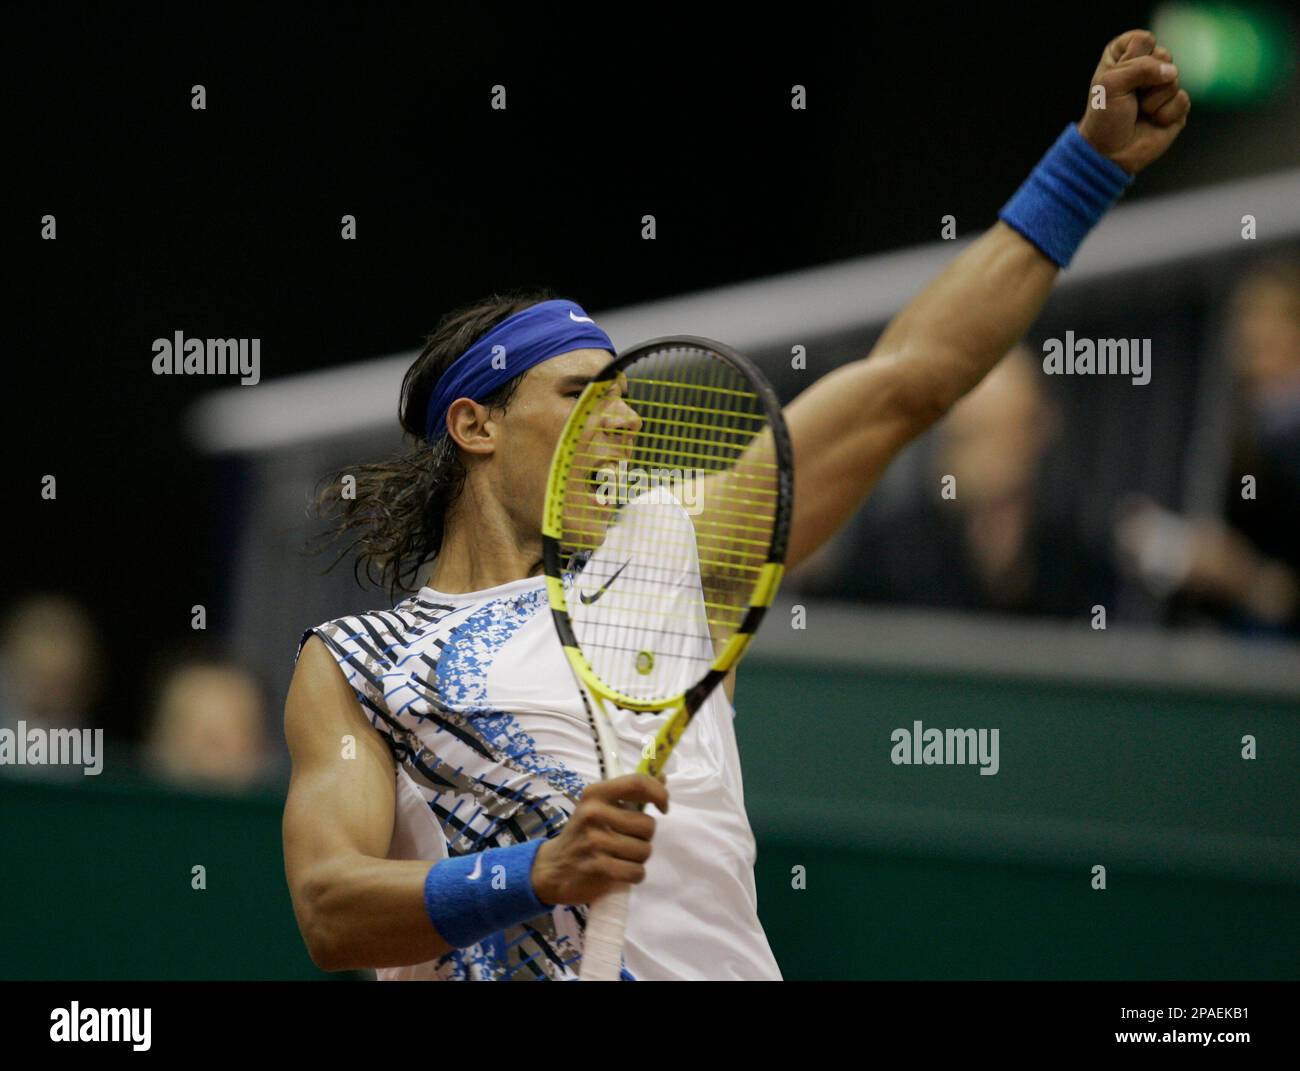 Rafael Nadal of Spain reacts after winning his match against Dmitry Tursunov of Russia at the ABN Amro tennis tournament at AHOY stadium in Rotterdam, Wednesday, Feb